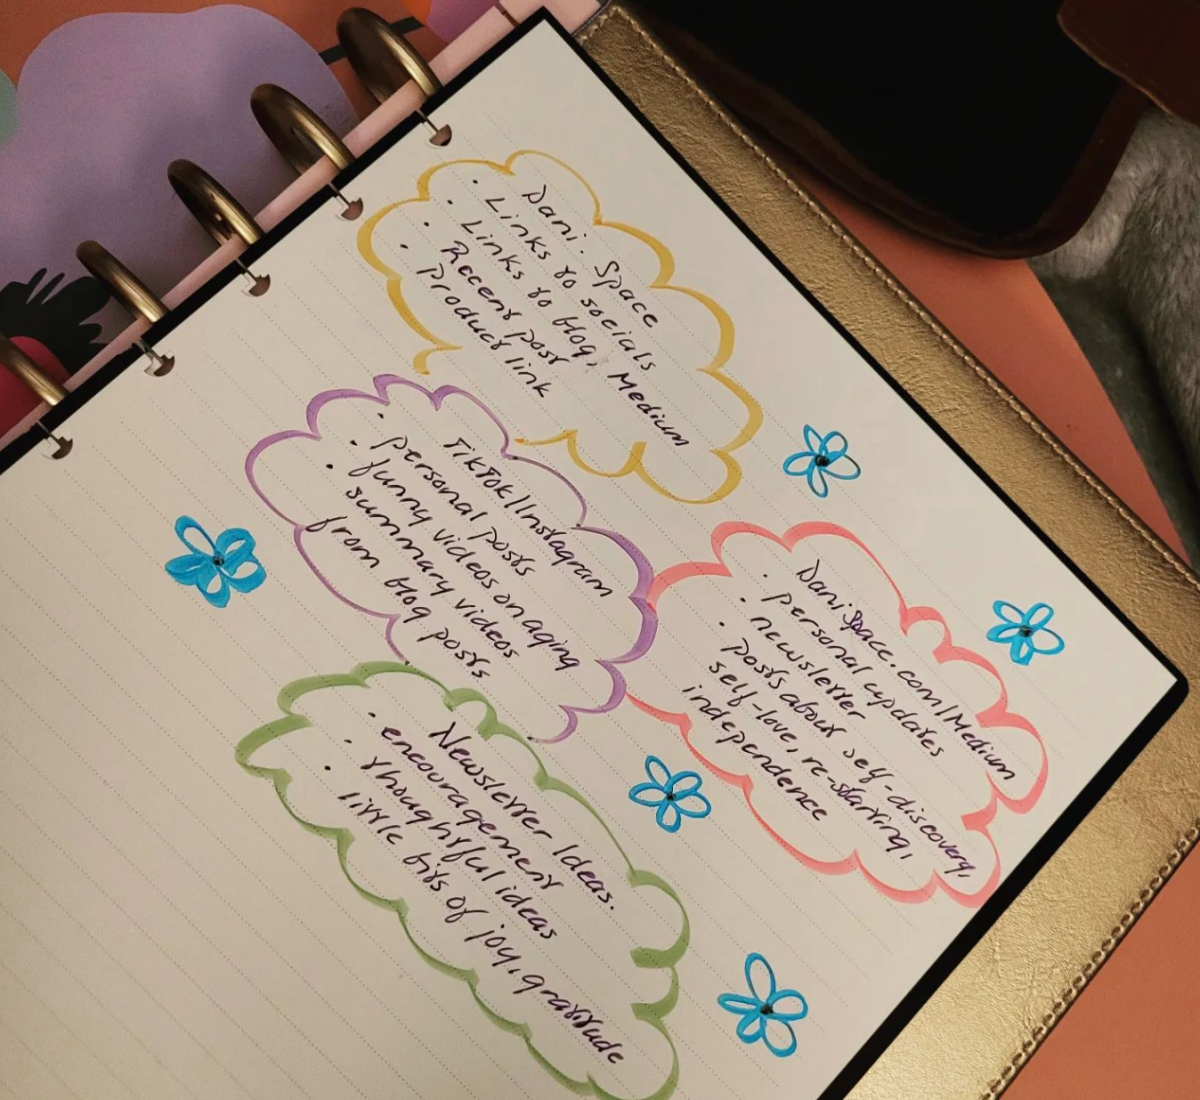 Use different pens and markers to make your Rocketbook pretty